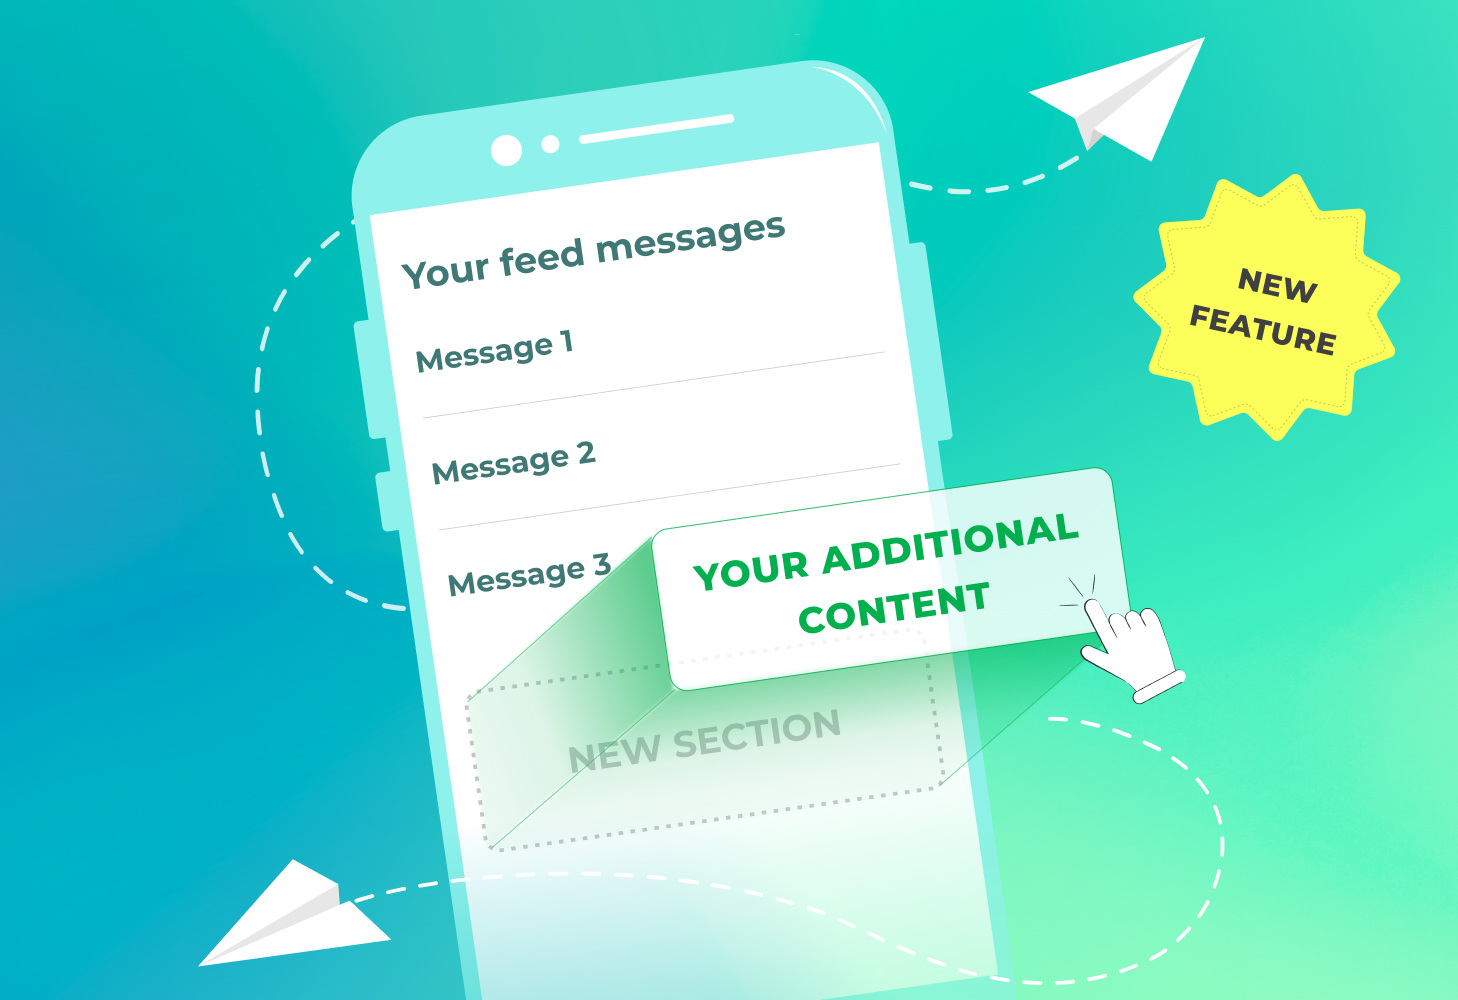 Append Content to messages